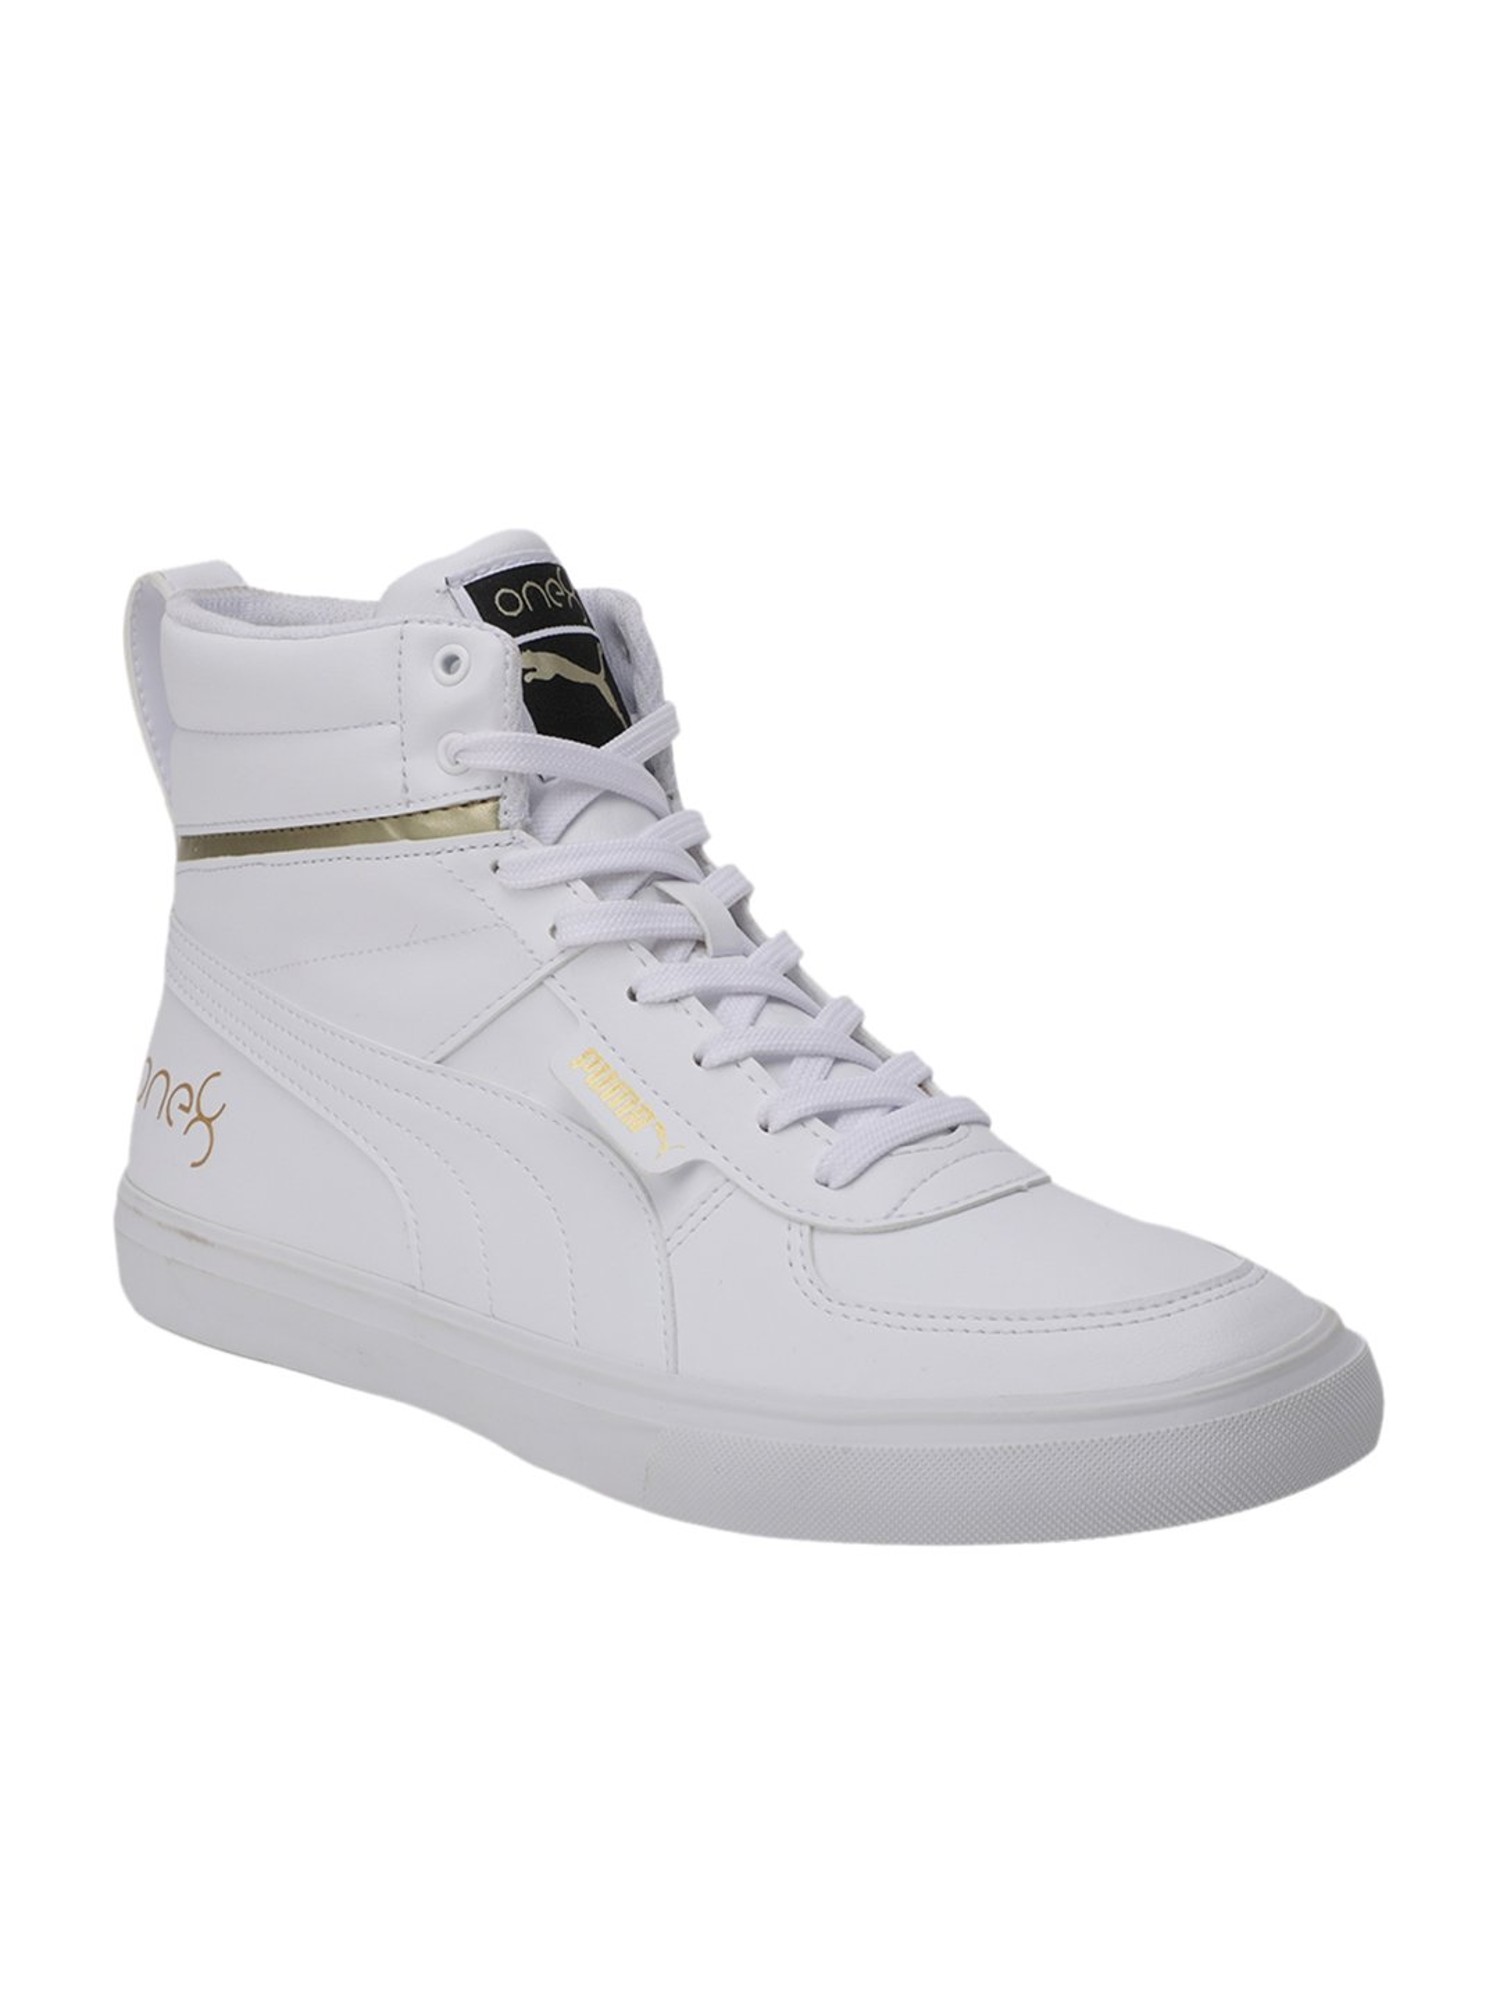 puma shoes for men high top white